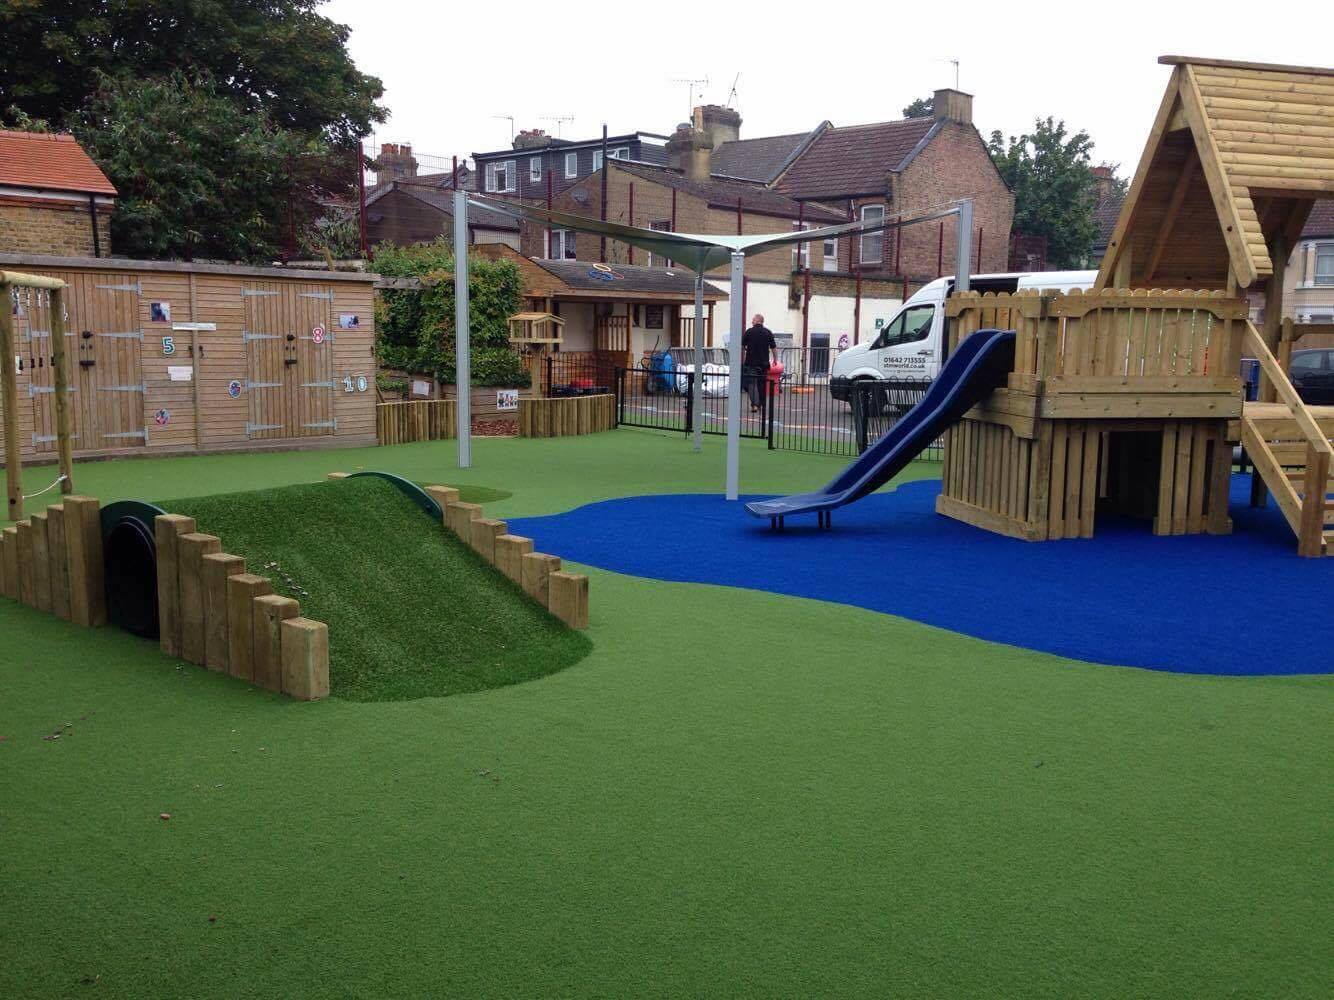 teletubbies tunnel and play equipment in playground